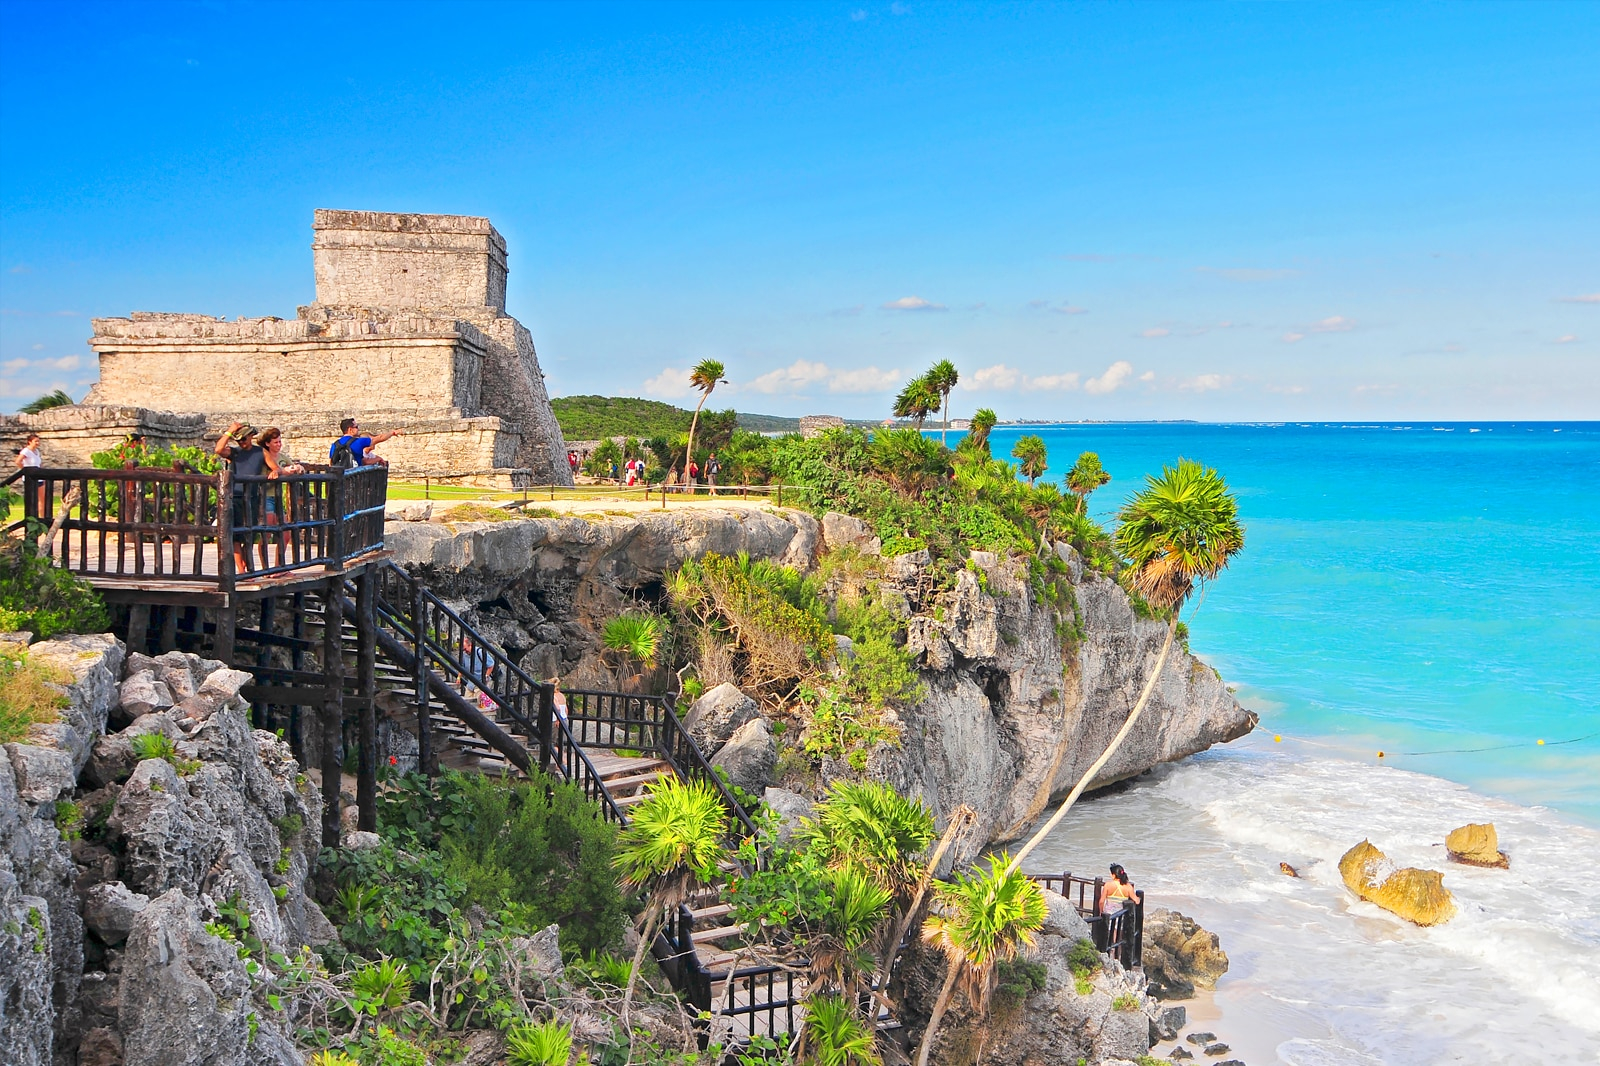 Picturesque view of Tulum, a top-rated location for working remotely from Mexico.